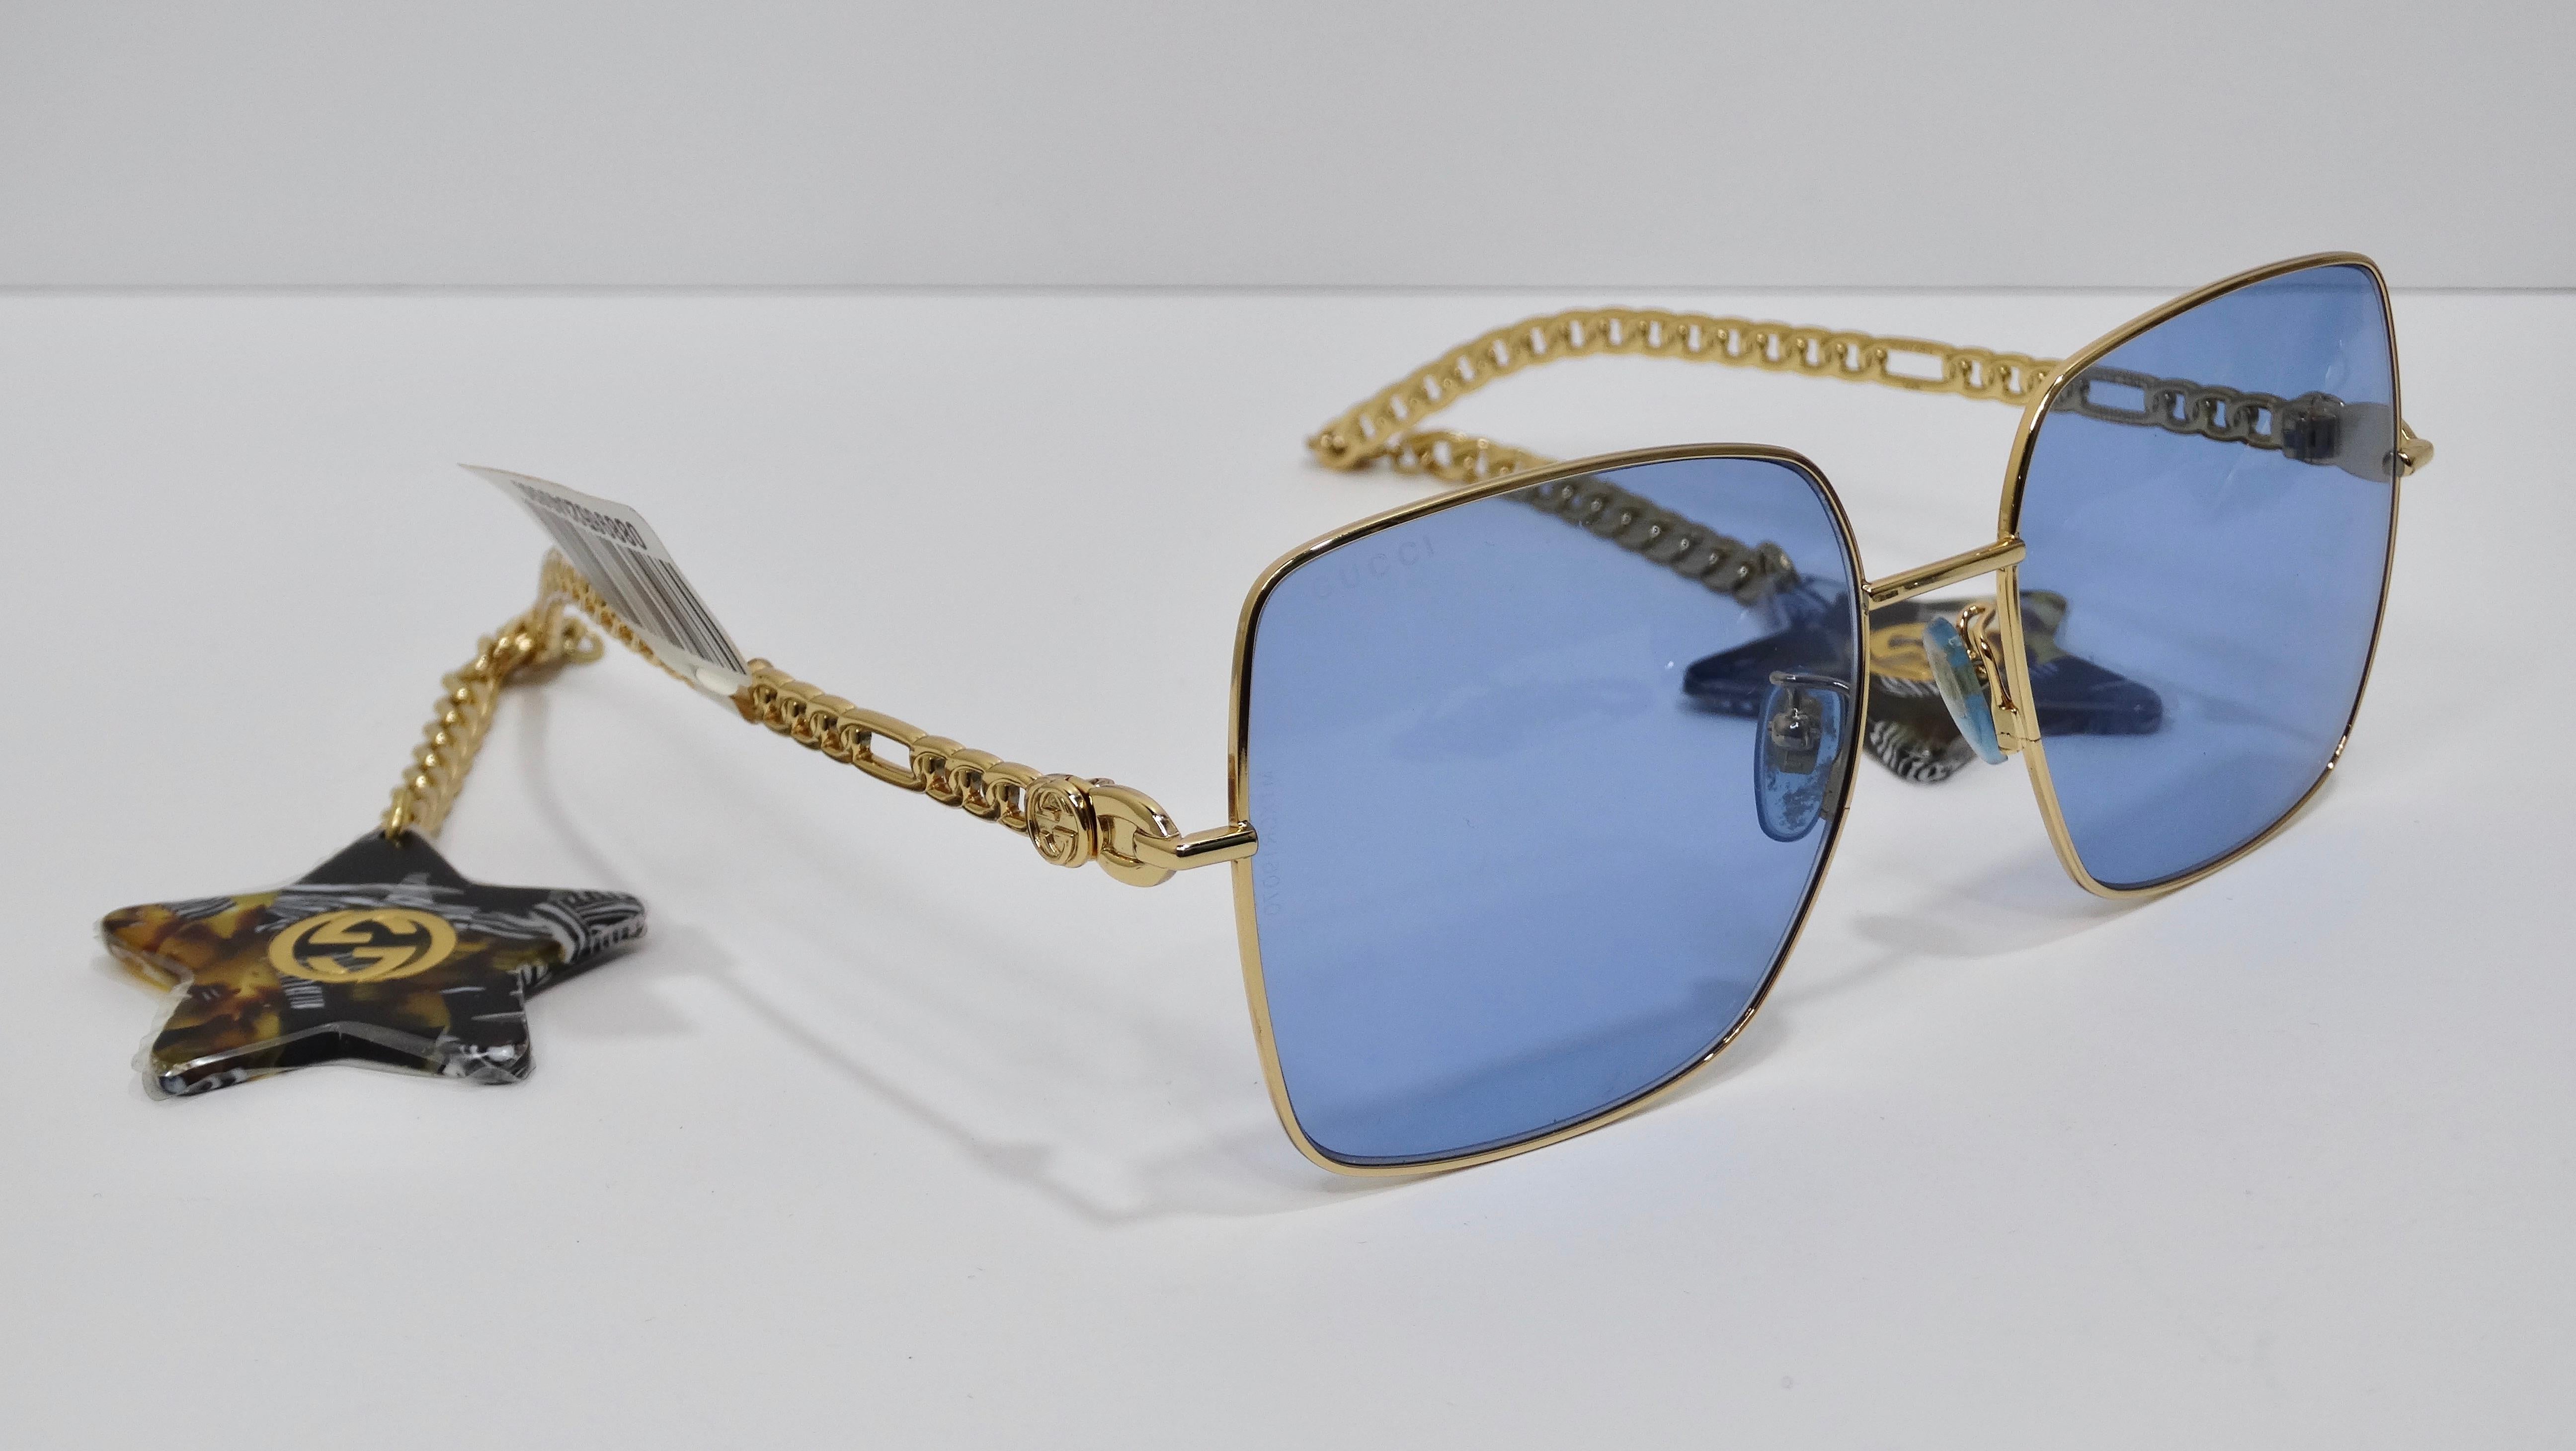 These sunglasses are for the fashionably bold dressers! From the iconic house of Gucci, they create an oversized gold frame with blue lenses. The temple is loaded with detail as it has a chain motif and a dangling chain with a star pendant made of